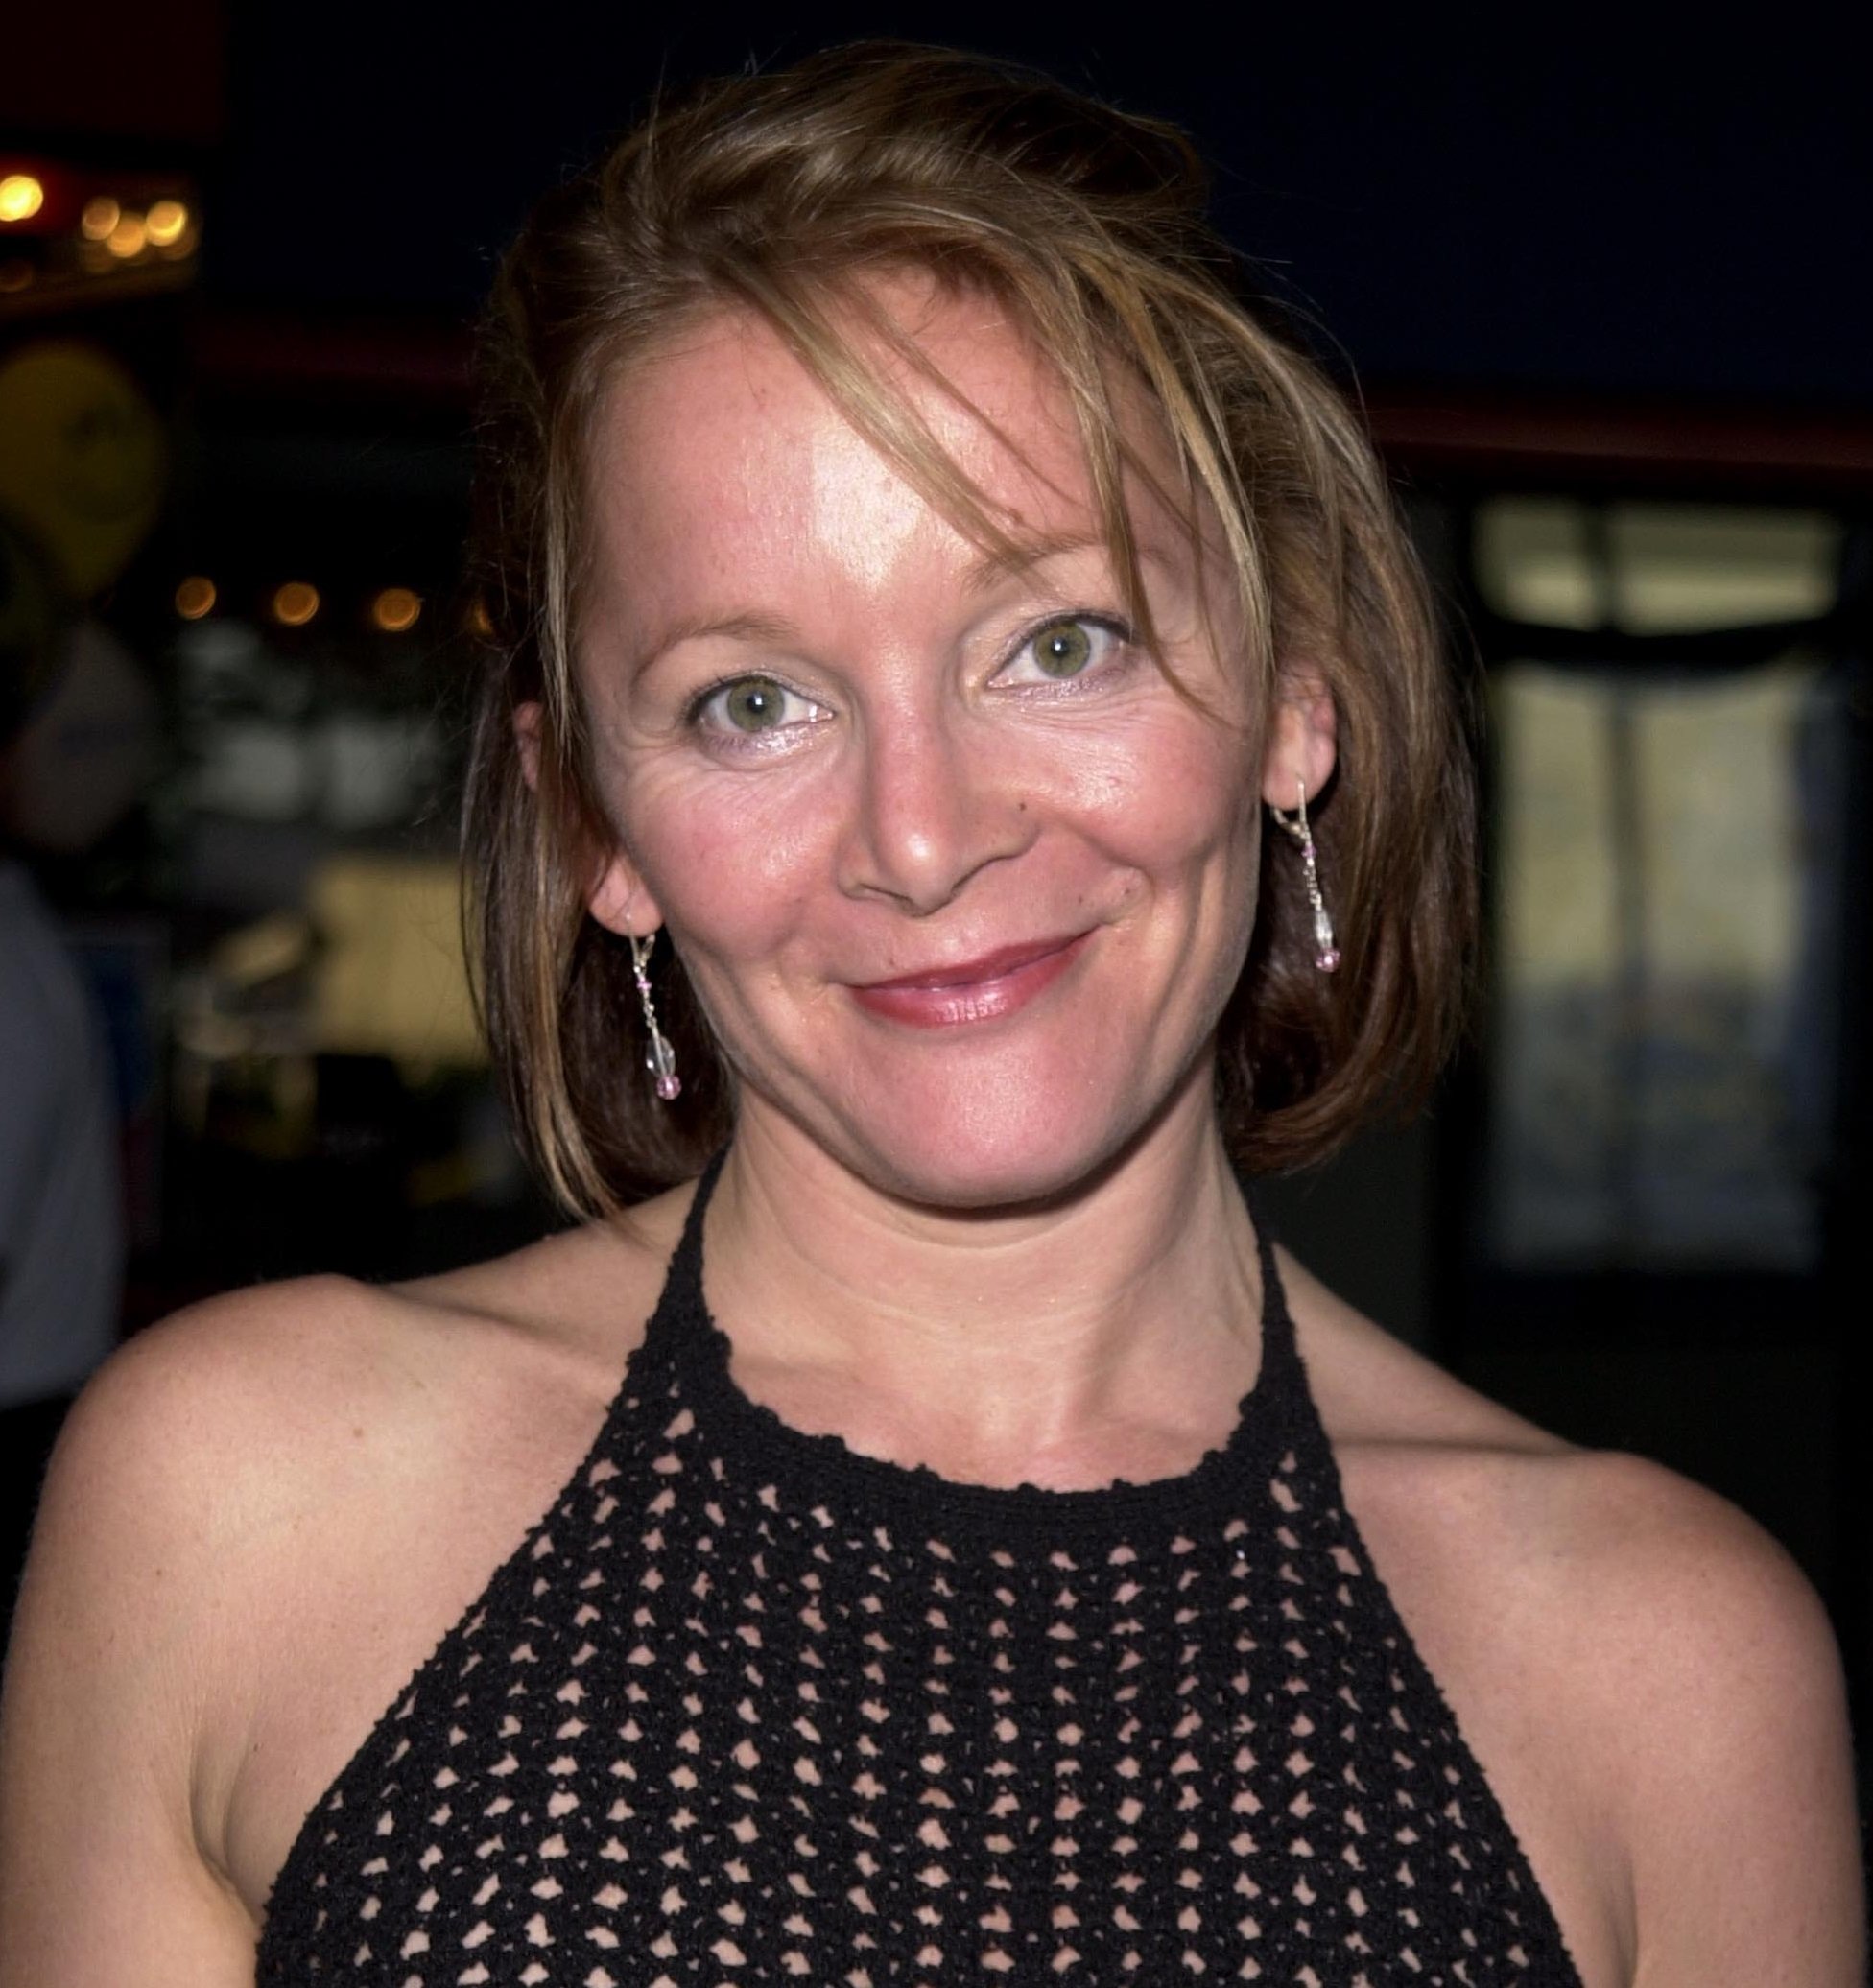 Mary Mara at the premiere of "Stranger Inside" on June 19, 2001 | Source: Getty Images